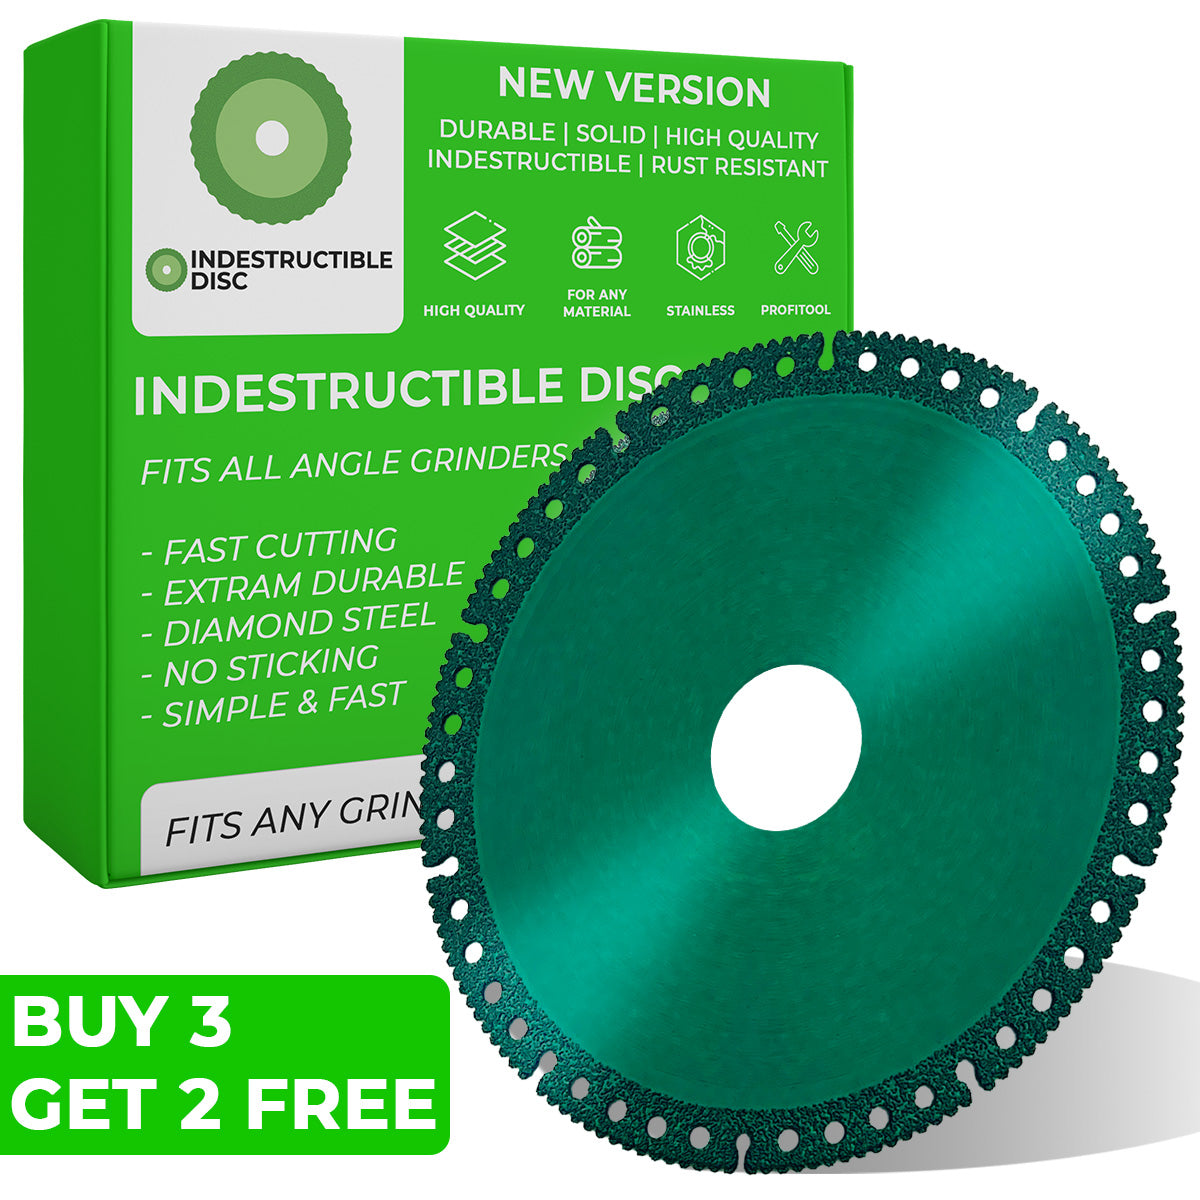 💎Best Sale 💎INDESTRUCTIBLE DISC™ 2.0 - Cut everything in seconds